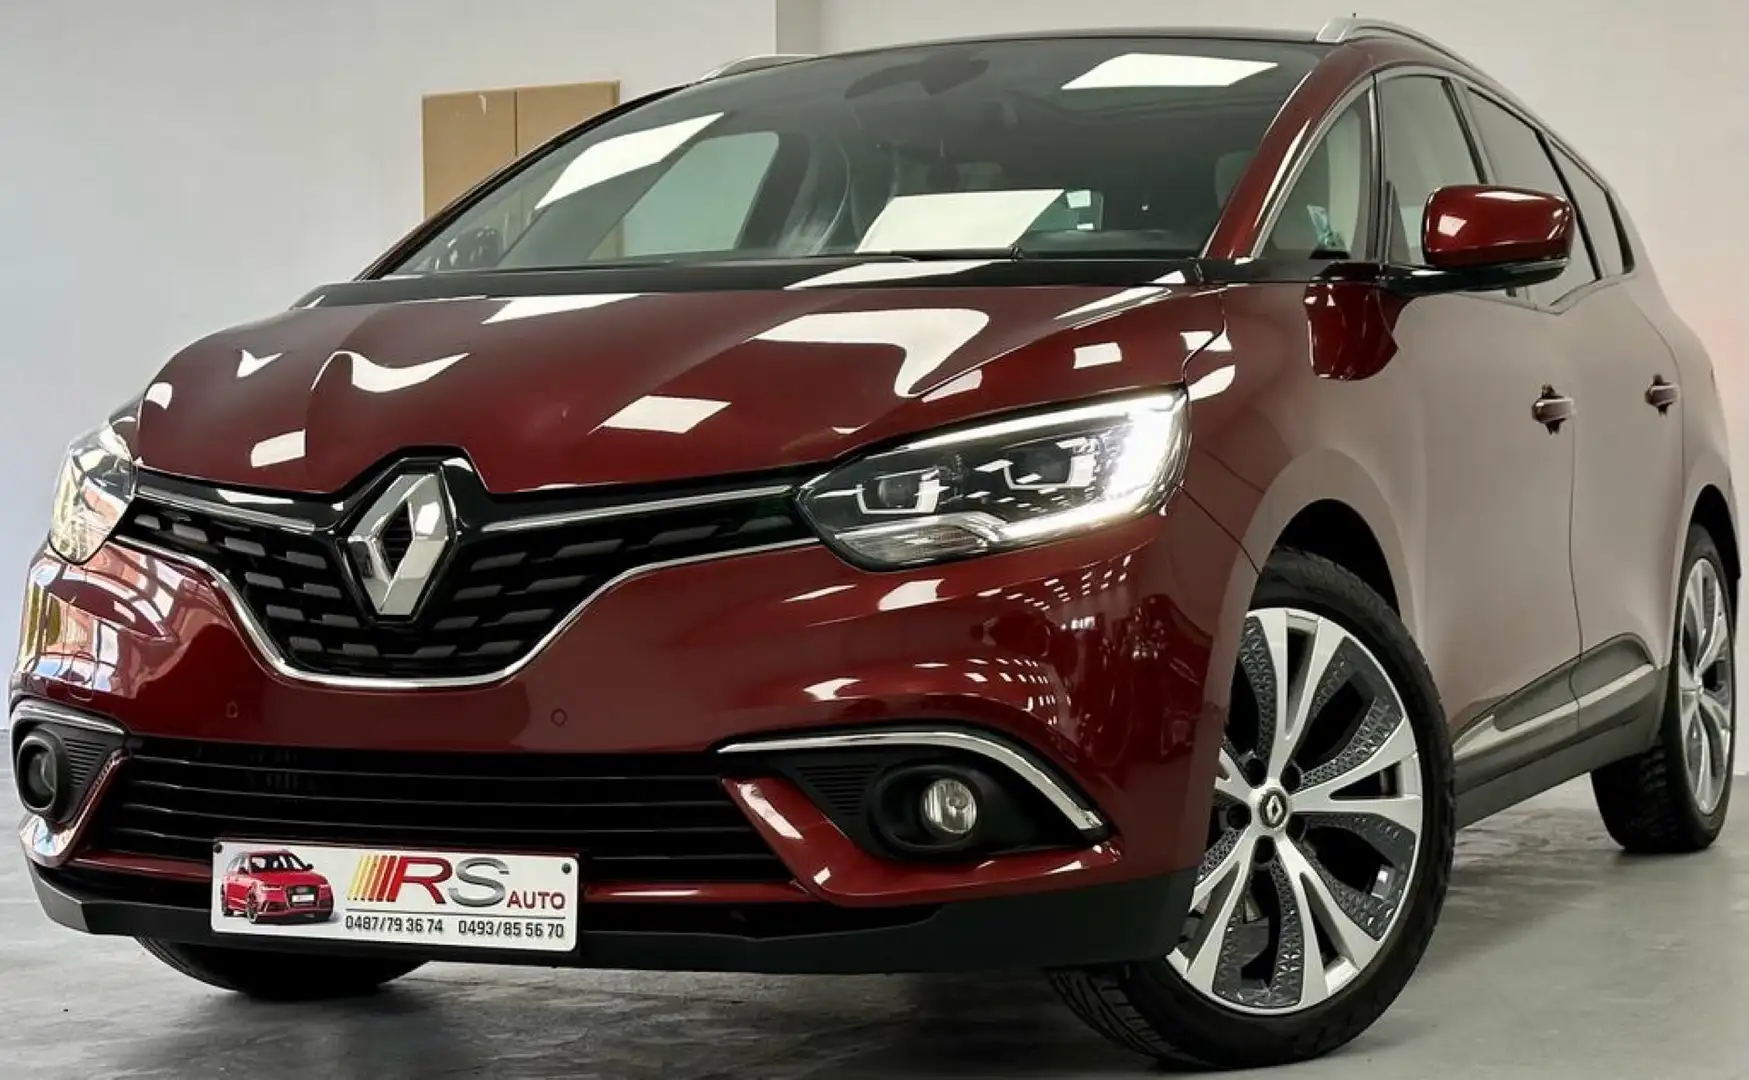 Renault Grand Scenic 1.6 dCi-GARANTIE 12 MOIS-XENON-CUIR-GPS-TOIT PANO Rouge - 1